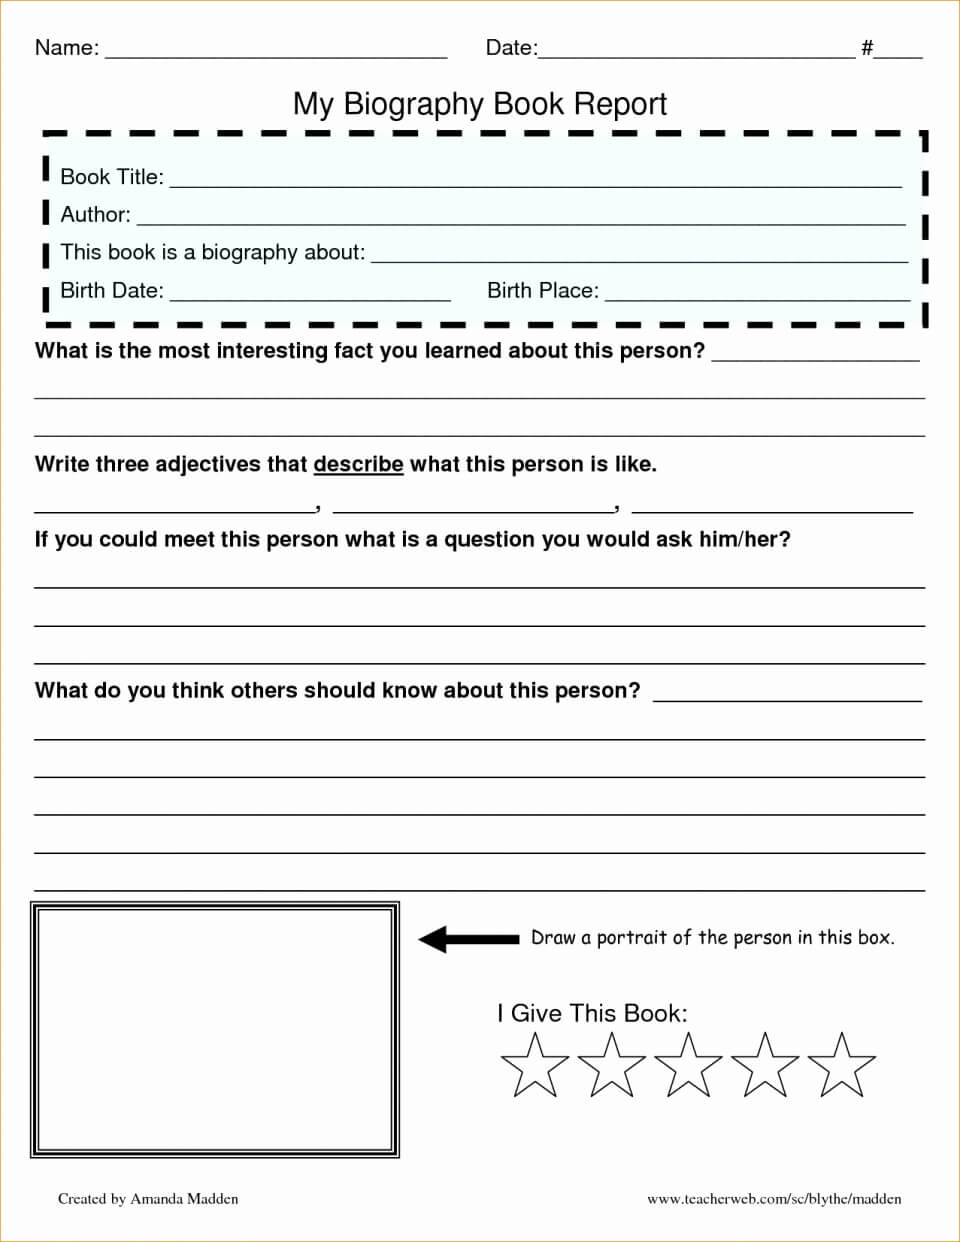 10+ Biography Book Report Template | 1Mundoreal For Biography Book Report Template